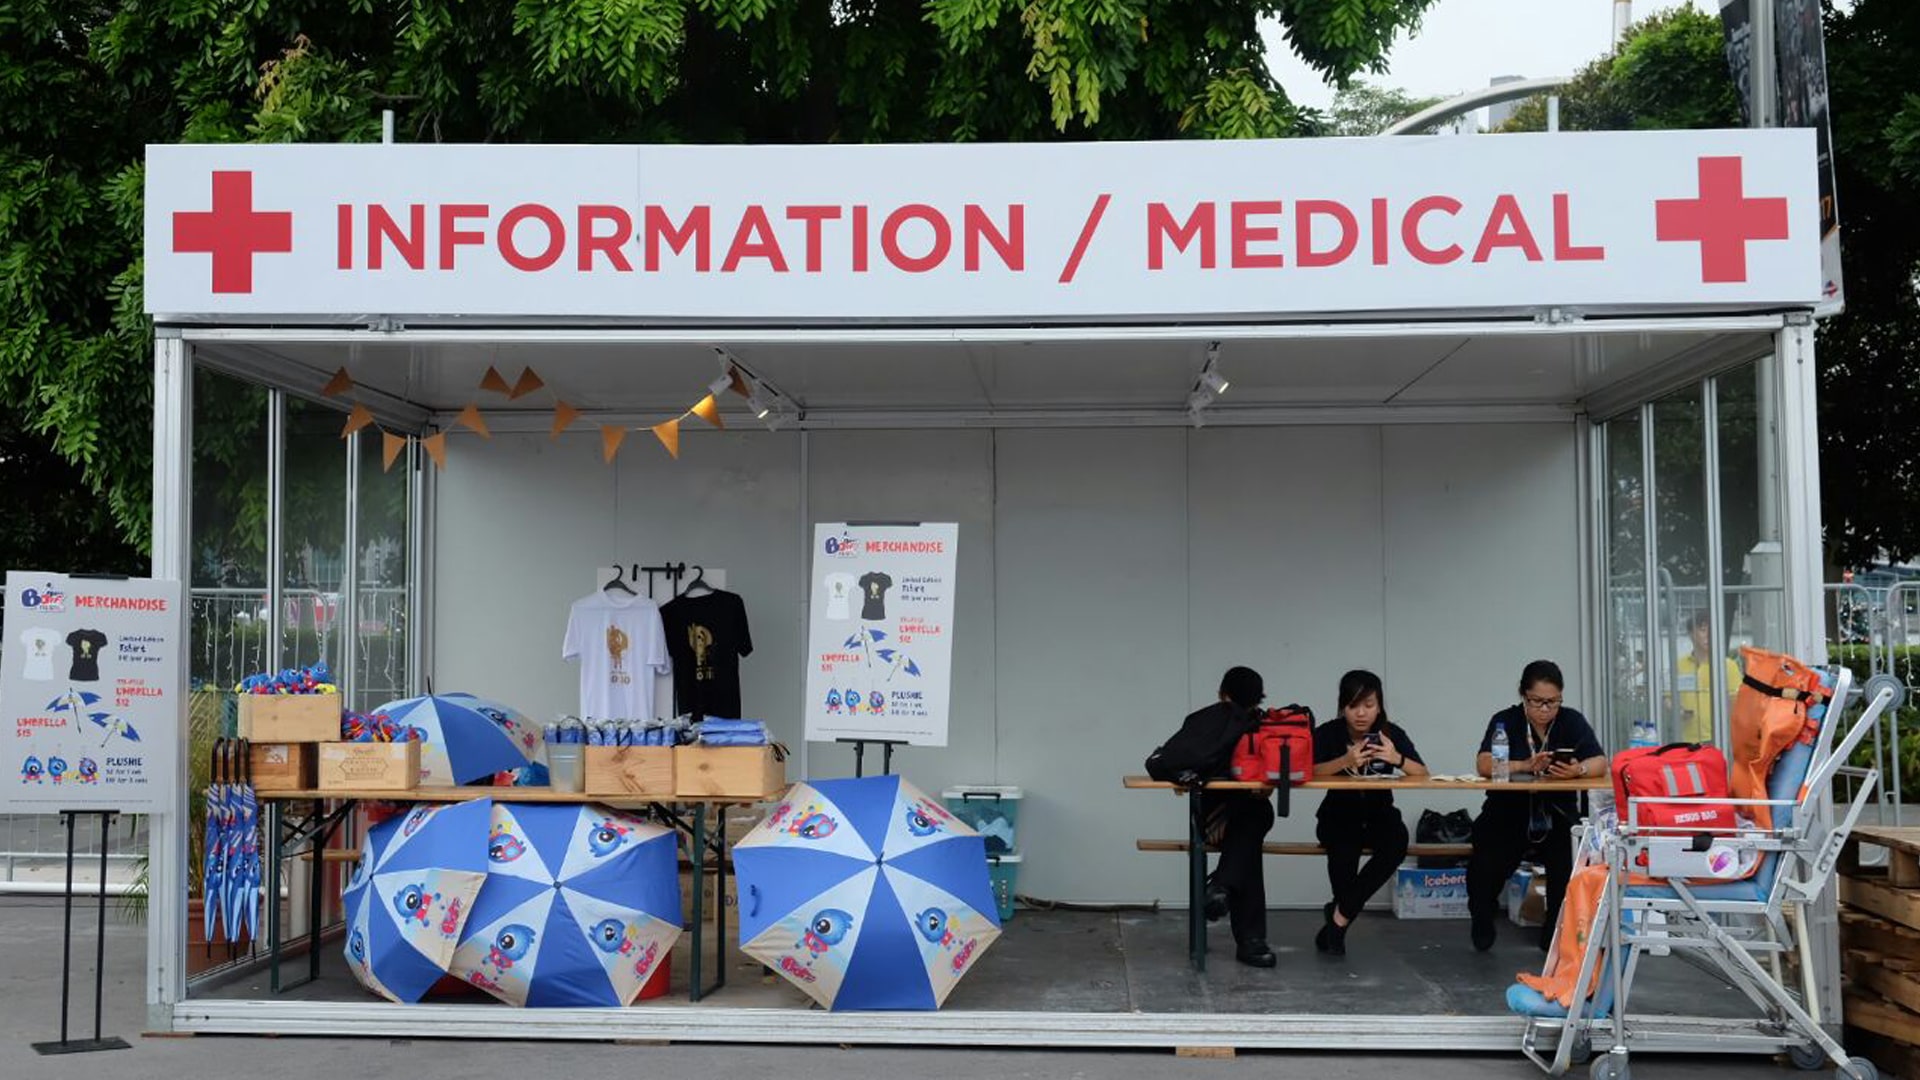 tsc_opt-images_tubelar-system_bounce-fiesta-information-medical-booth-1920x1080-01-min